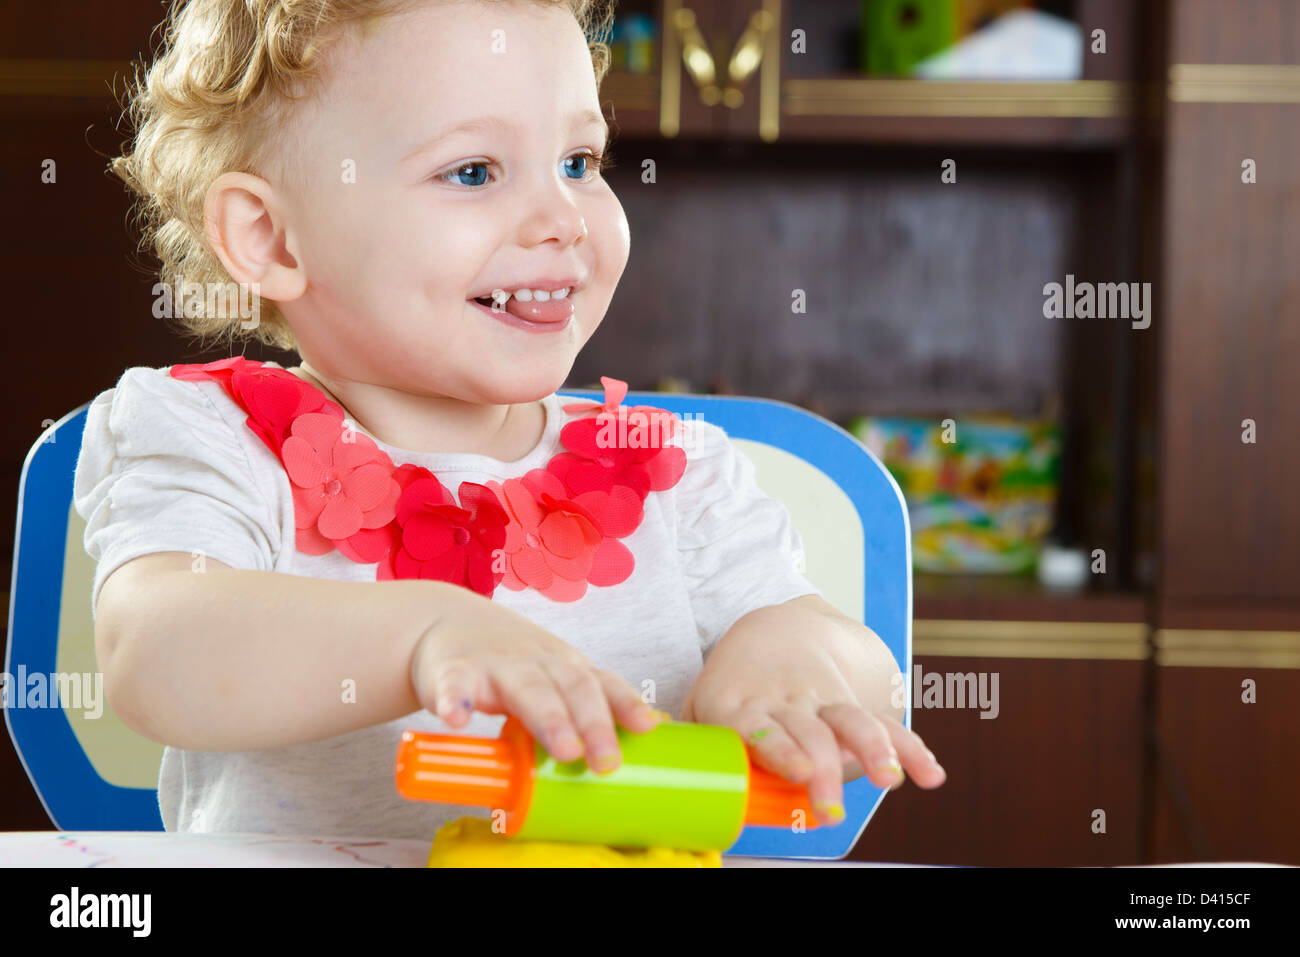 Cute smiling girl rolling plastiline dough at home Stock Photo - Alamy